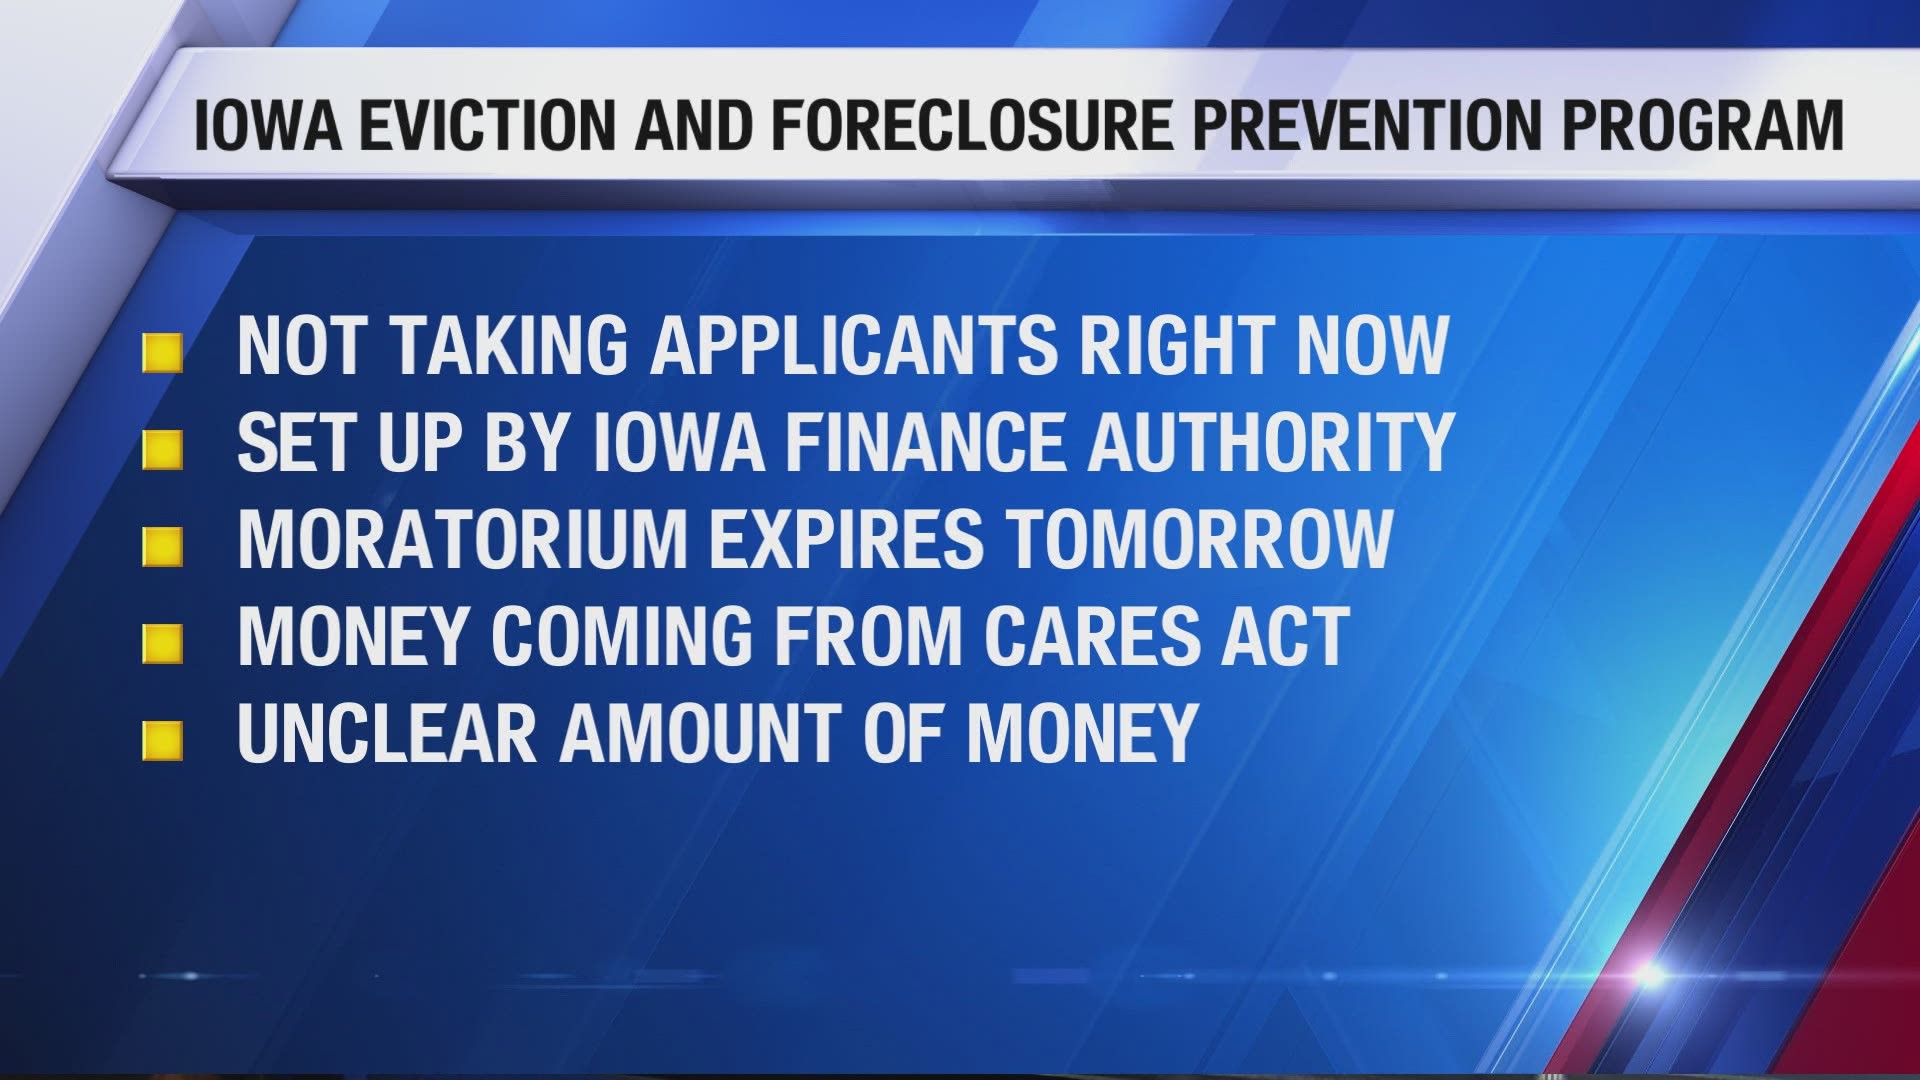 Des Moines Mayor Frank Cownie on expiration of moratorium on evictions and foreclosures